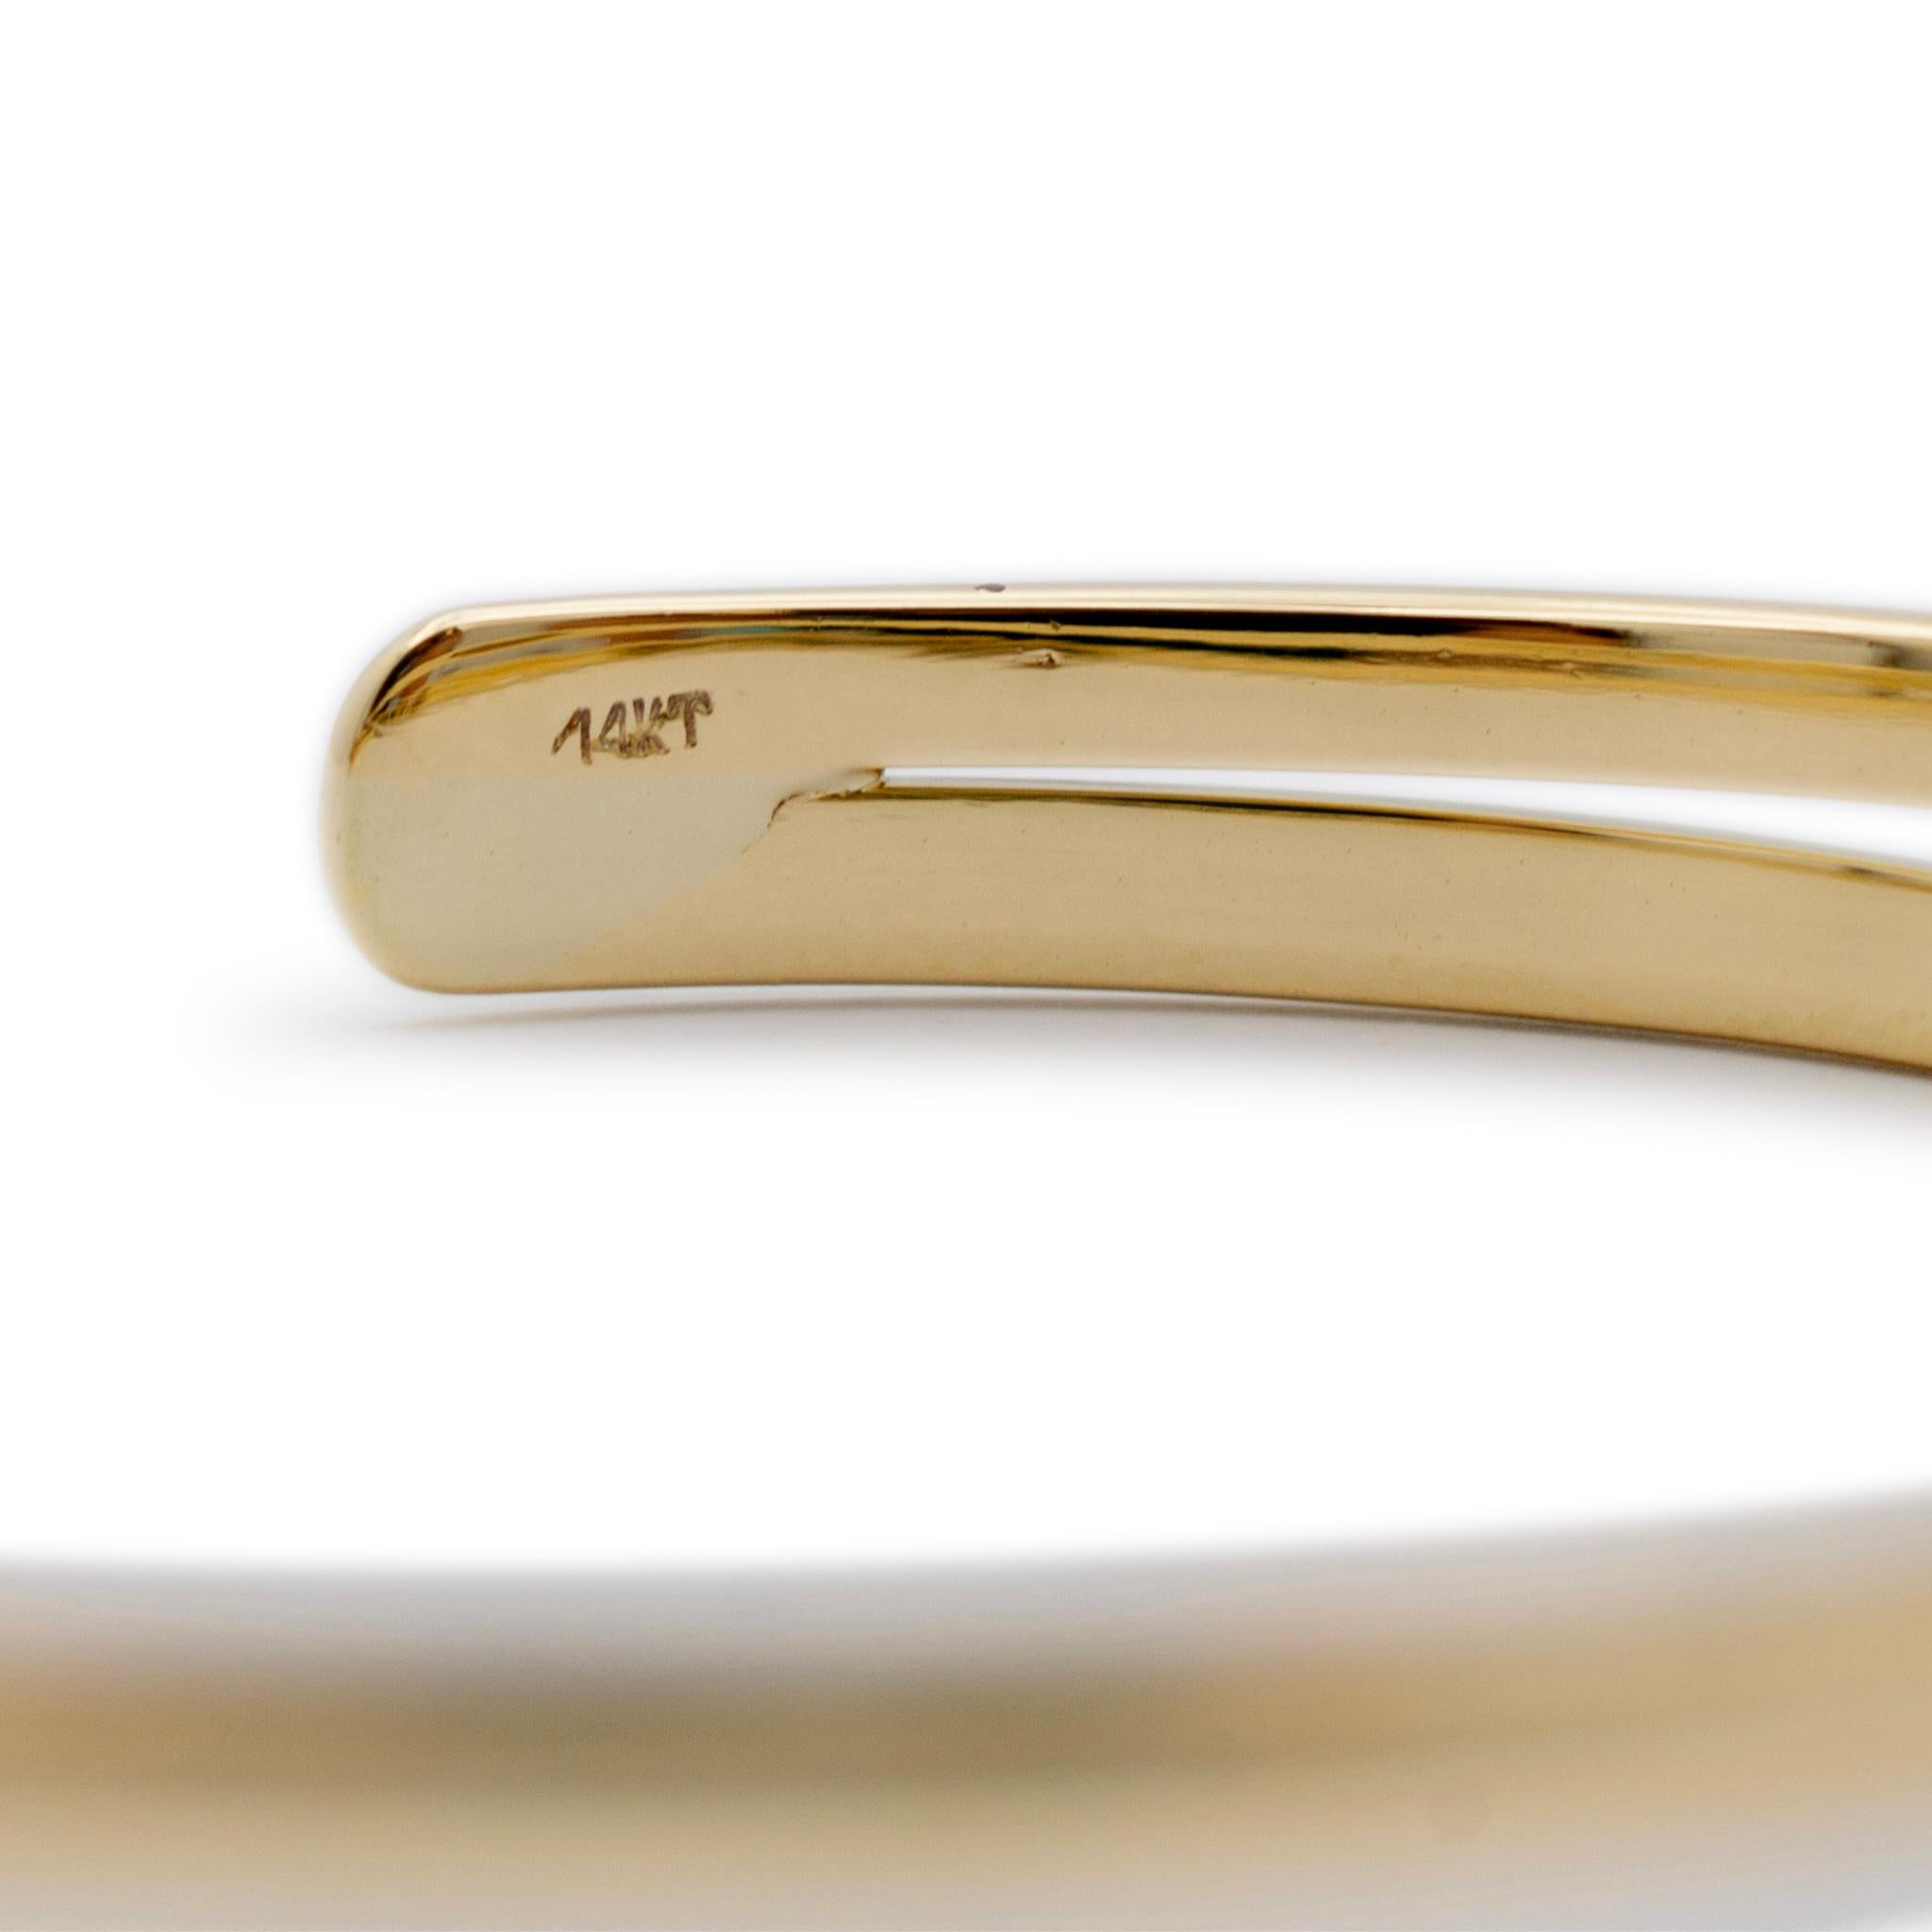 Ladies Vintage 14K Yellow Gold Diamond Cuff Bangle Bracelet In Excellent Condition For Sale In Houston, TX